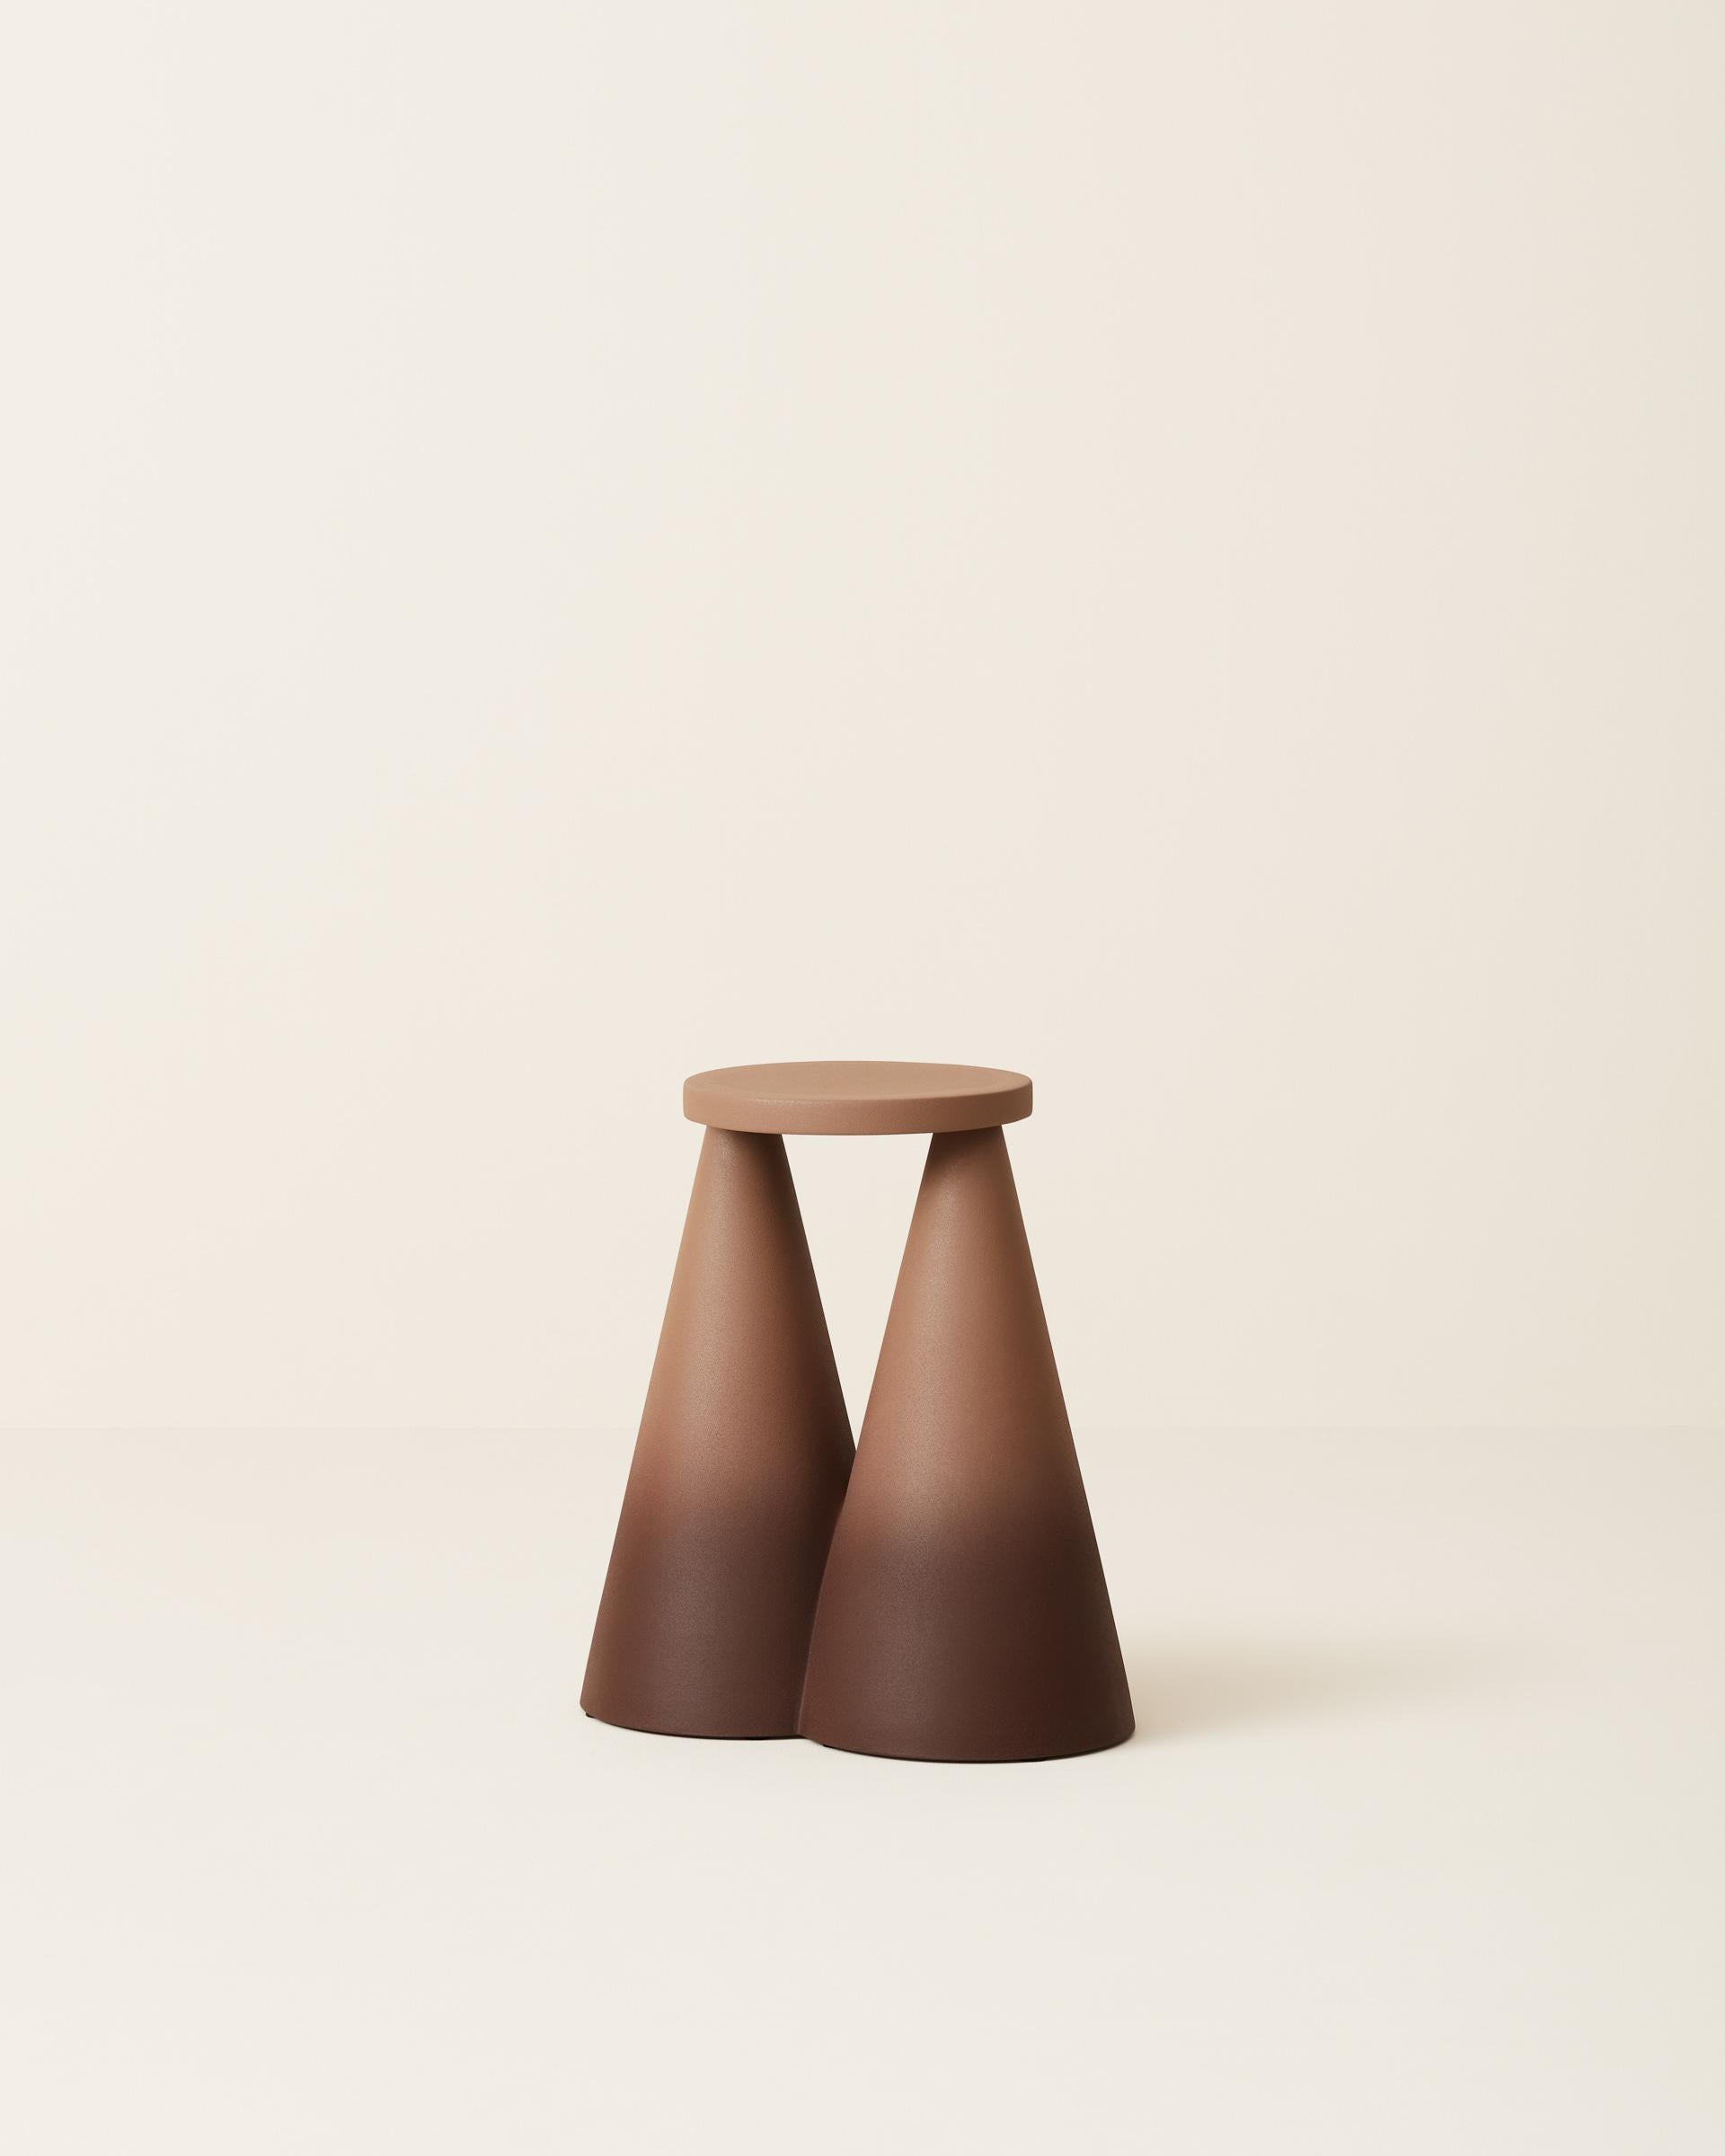 Isola side table is completely made in ceramic using high temperature furnace, to make the material stronger.

The large base makes the object stable as well as unique on its design.

Each piece is then finished by playing with the contrast